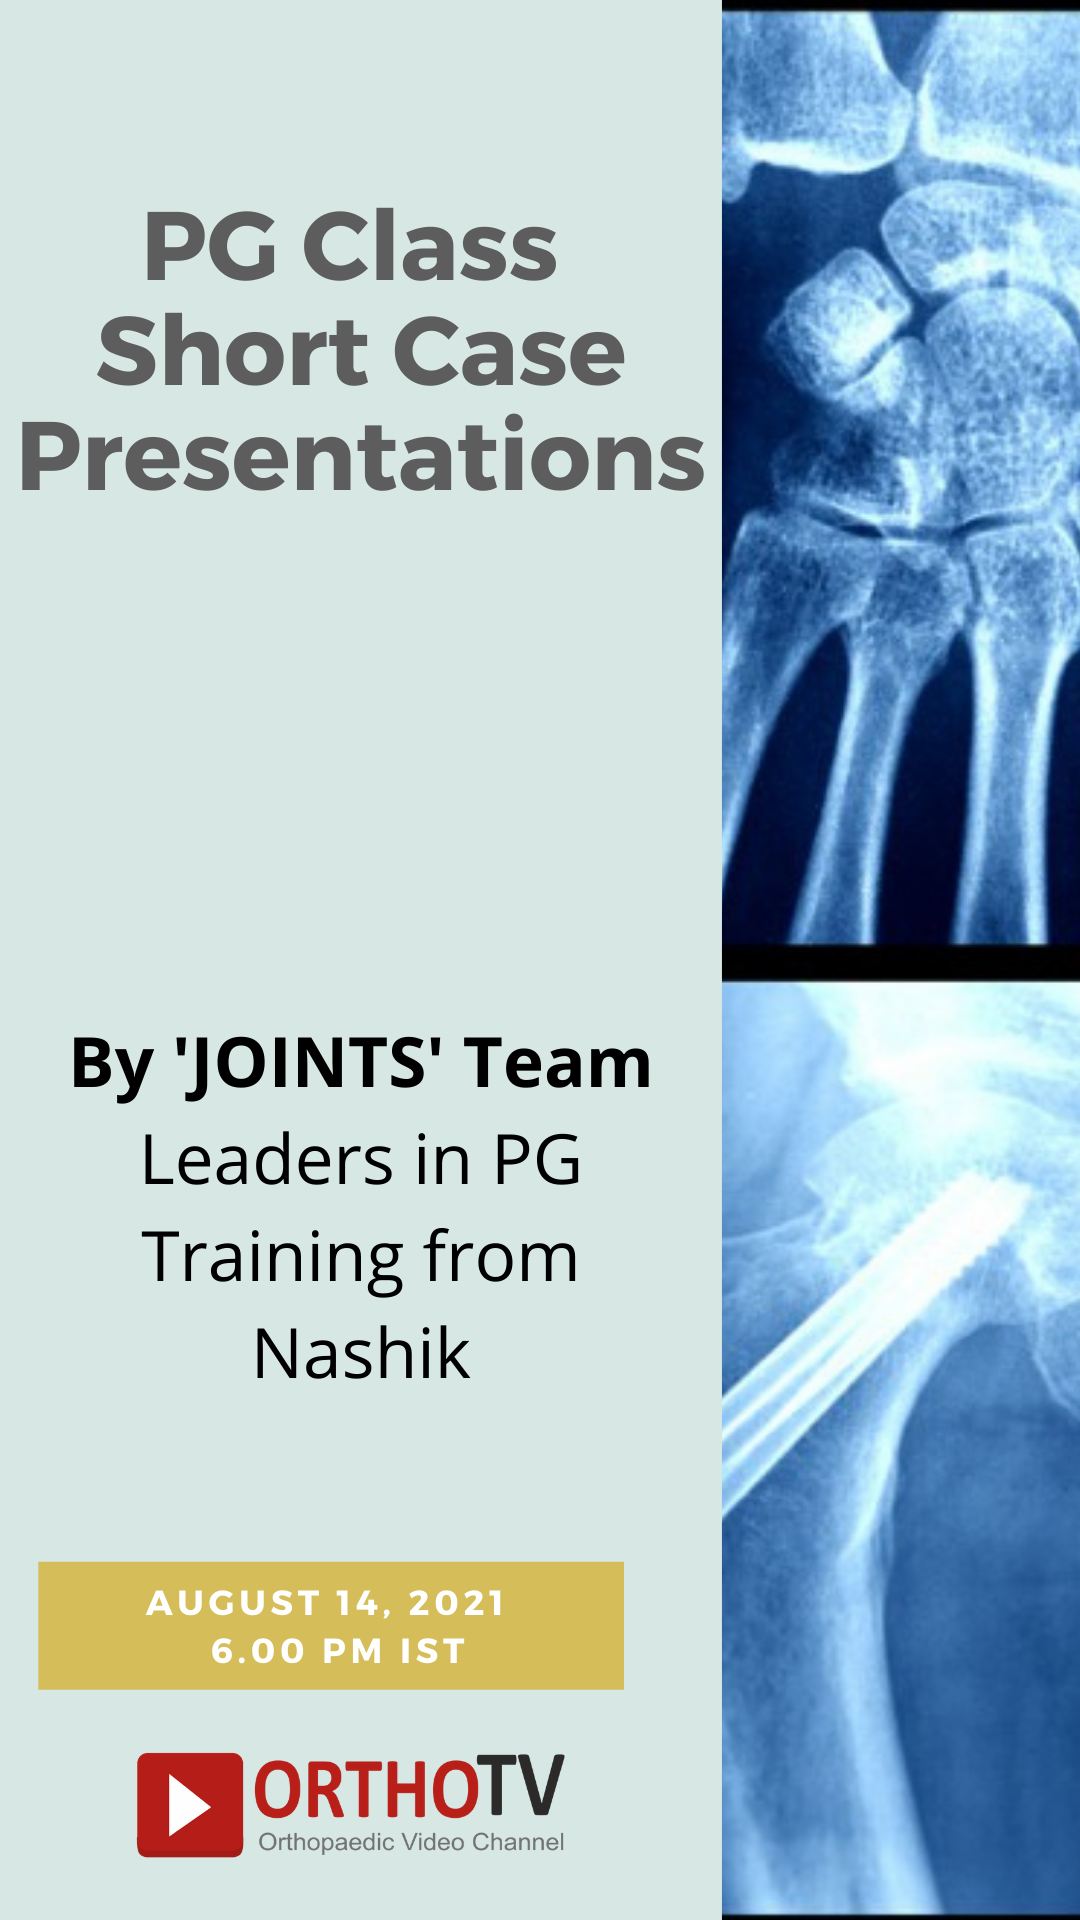 PG Class Short Case Presentations by JOINTS